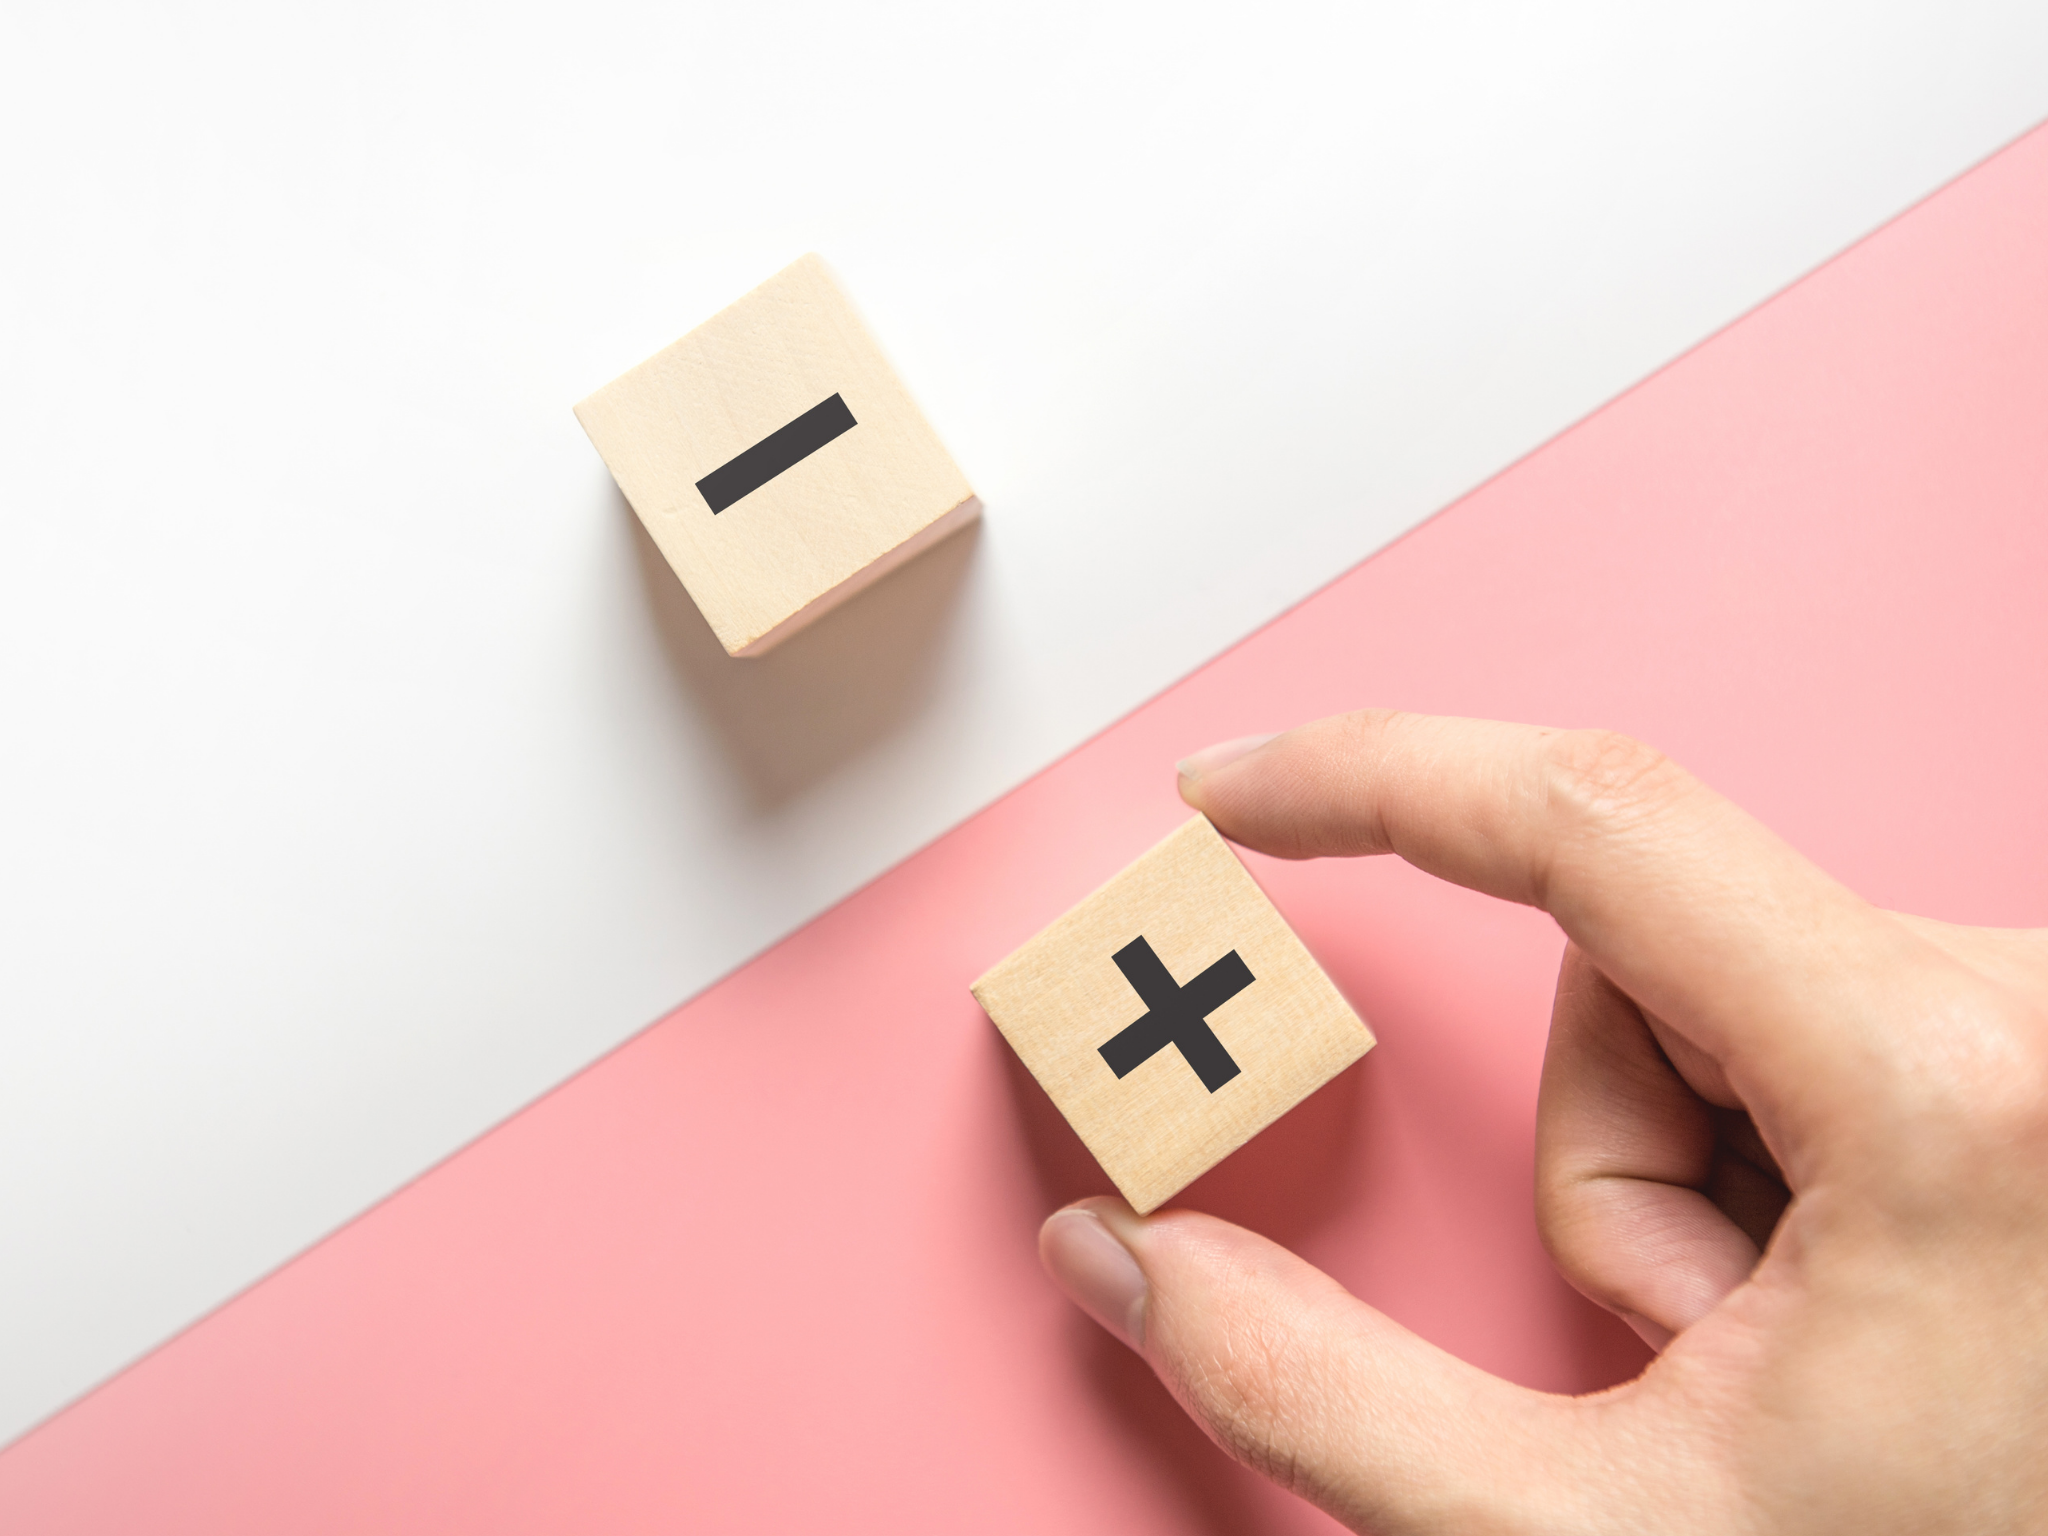 two wooden blocks - one with a minus sign and one with a plus sign - each on top of a table. The plus is on the pink half of the table, the minus on the white.